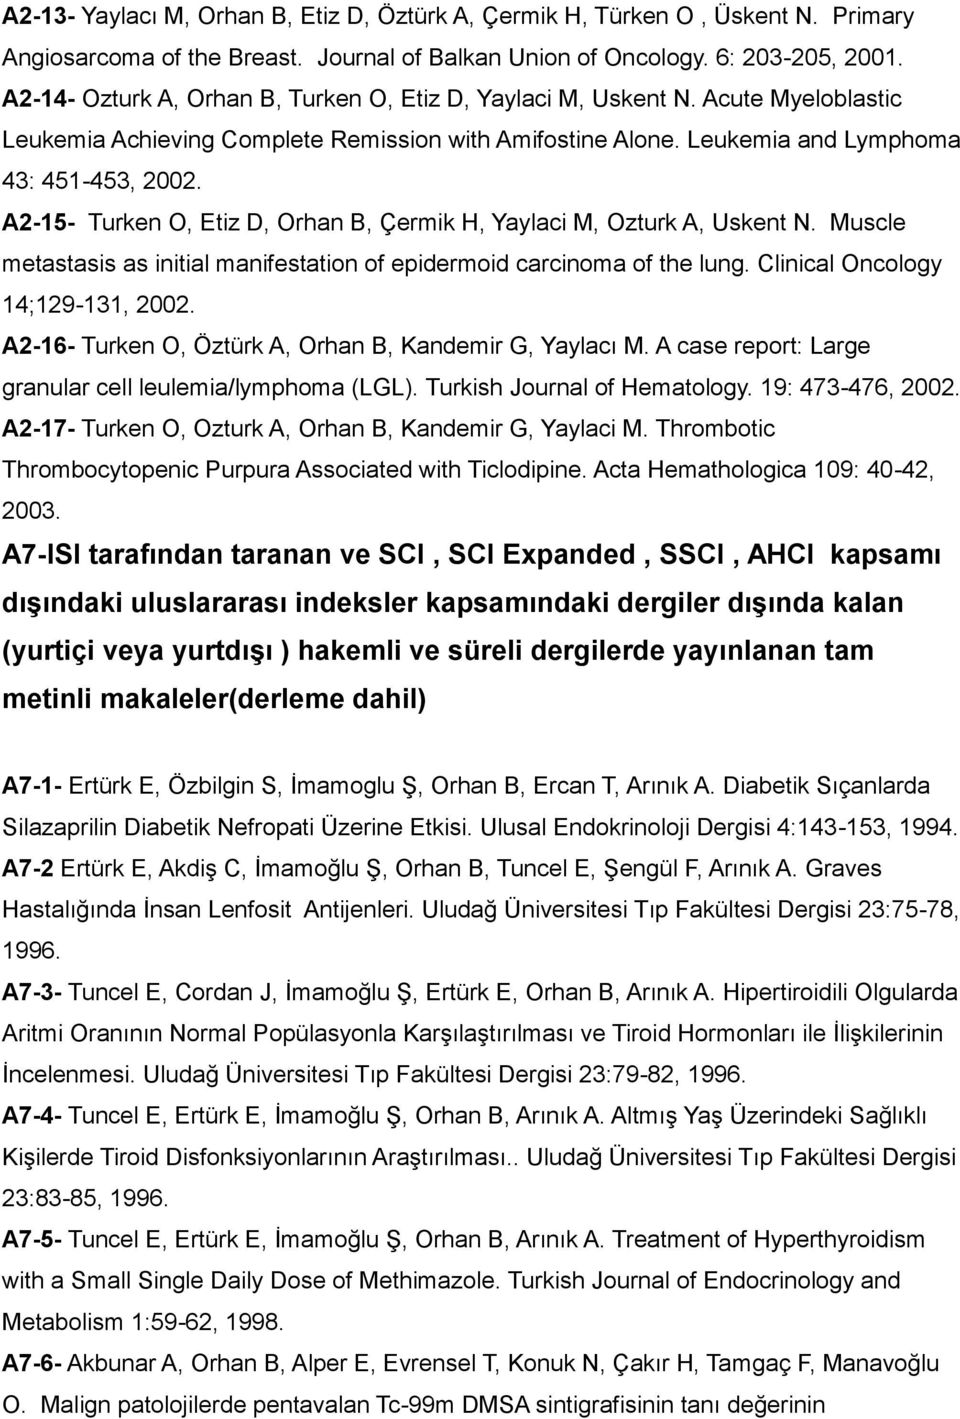 A2-15- Turken O, Etiz D, Orhan B, Çermik H, Yaylaci M, Ozturk A, Uskent N. Muscle metastasis as initial manifestation of epidermoid carcinoma of the lung. Clinical Oncology 14;129-131, 2002.